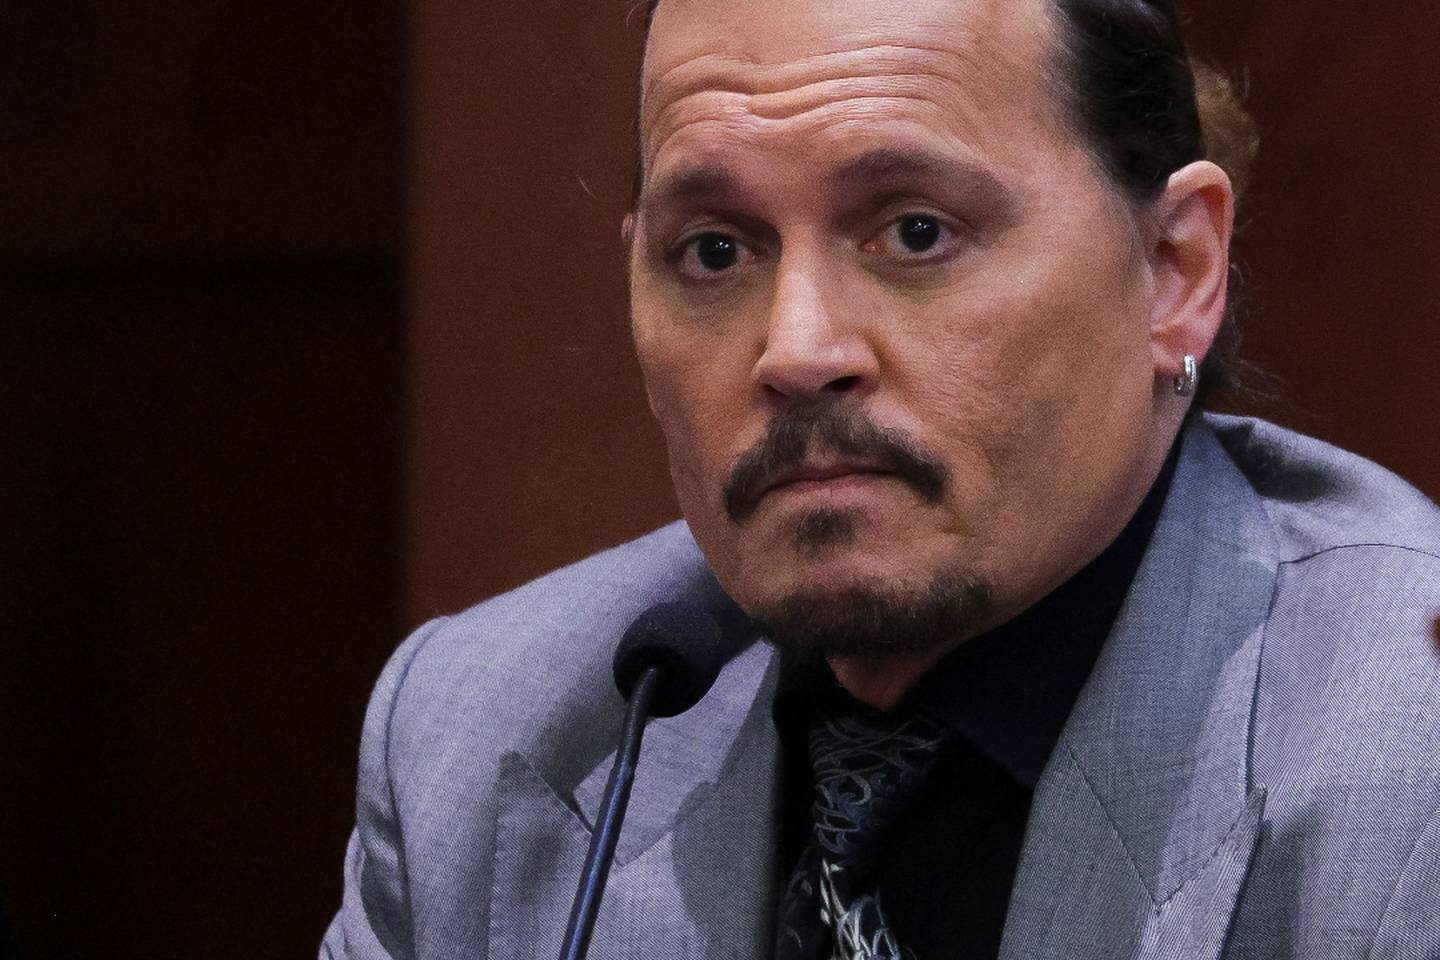 Johnny Depp says former wife's actions seem like 'pure hatred'